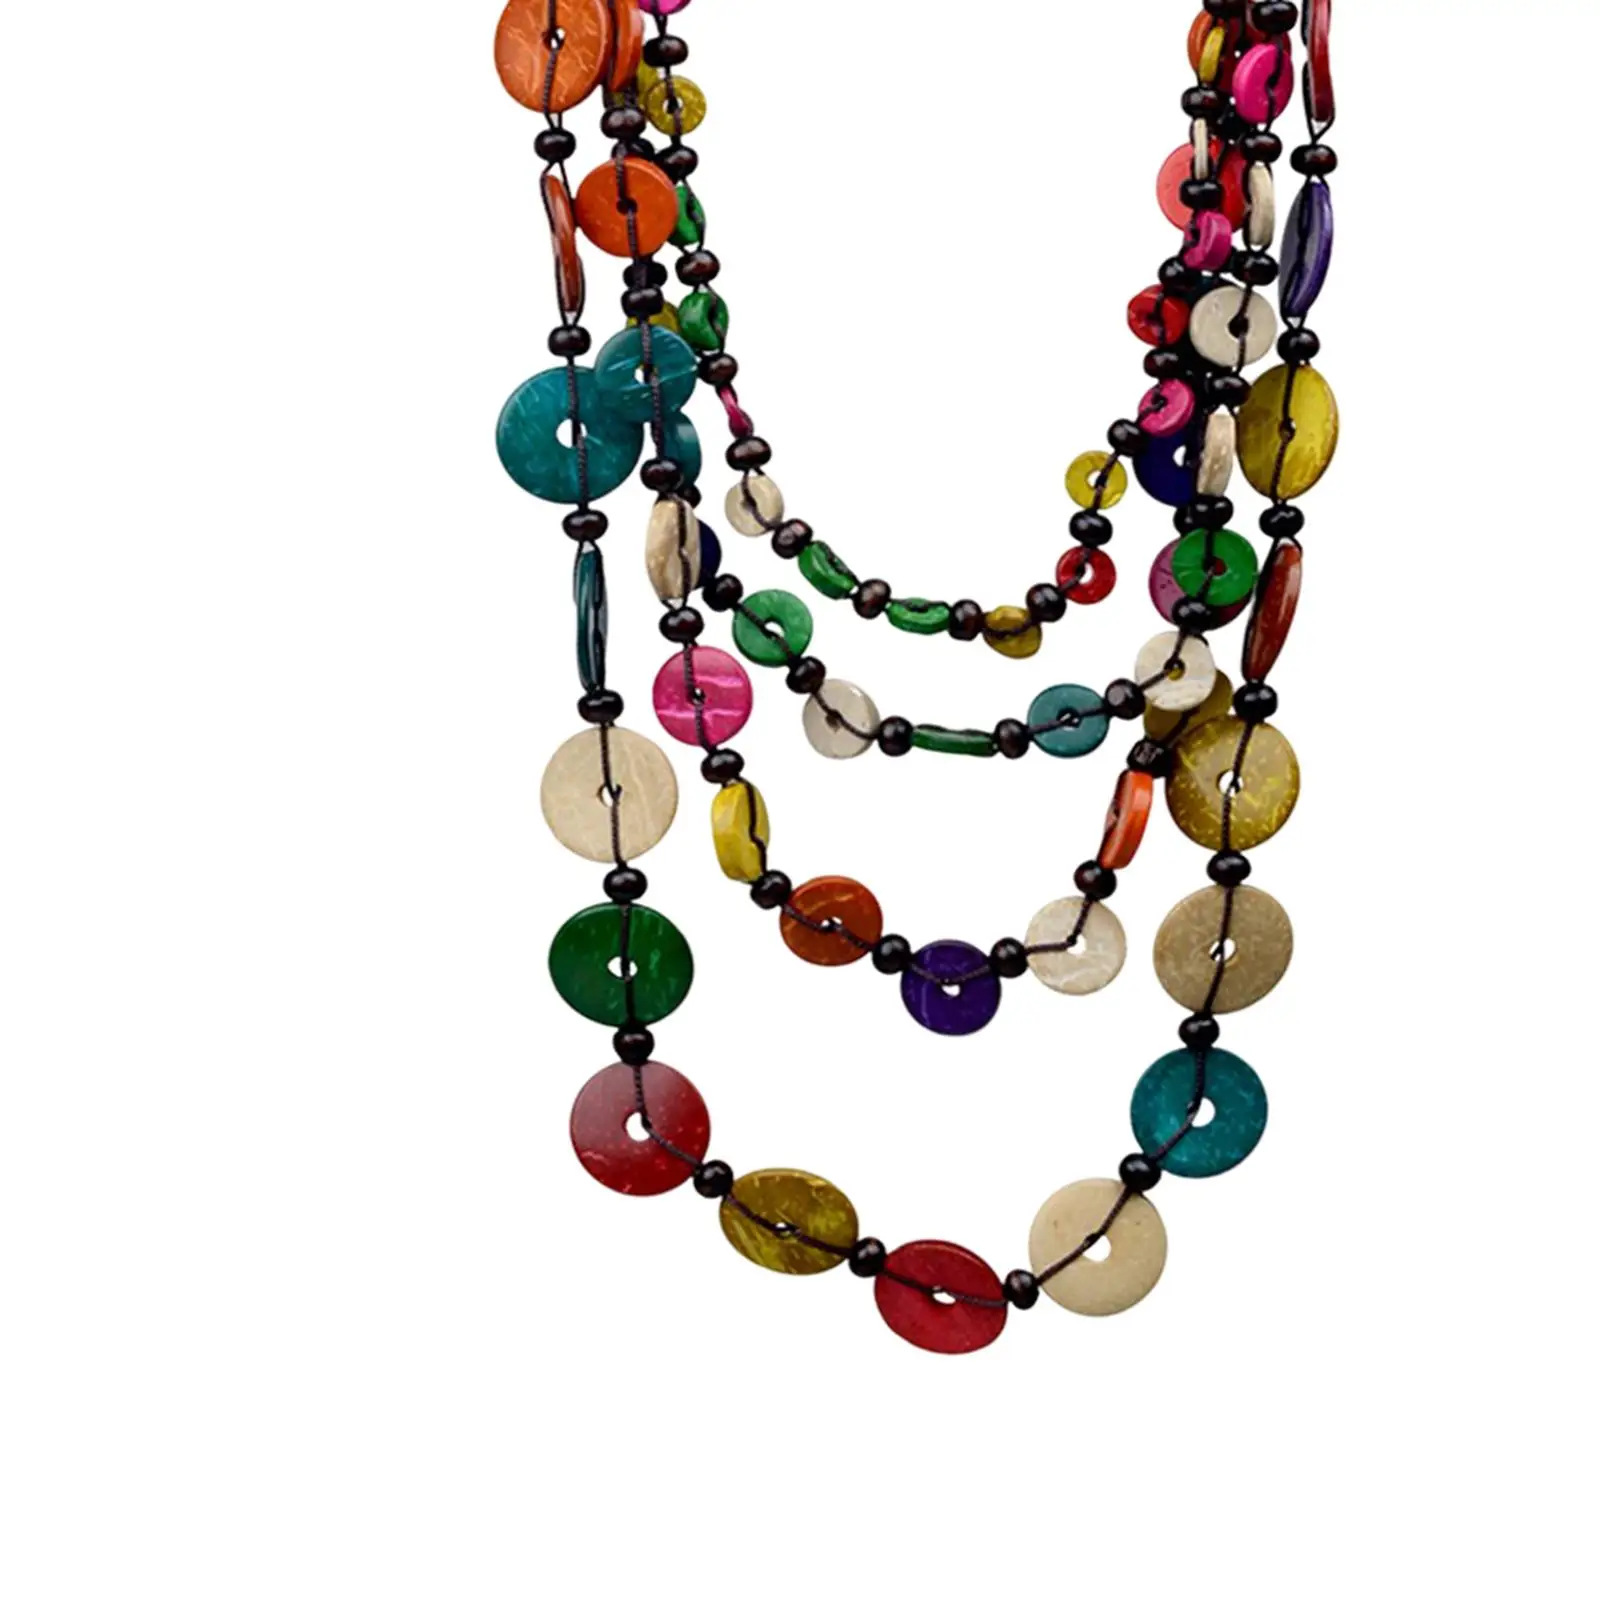 Layered Necklace Pendant Women Statement 31.5inch Chain Beaded for Dating Beach vacation